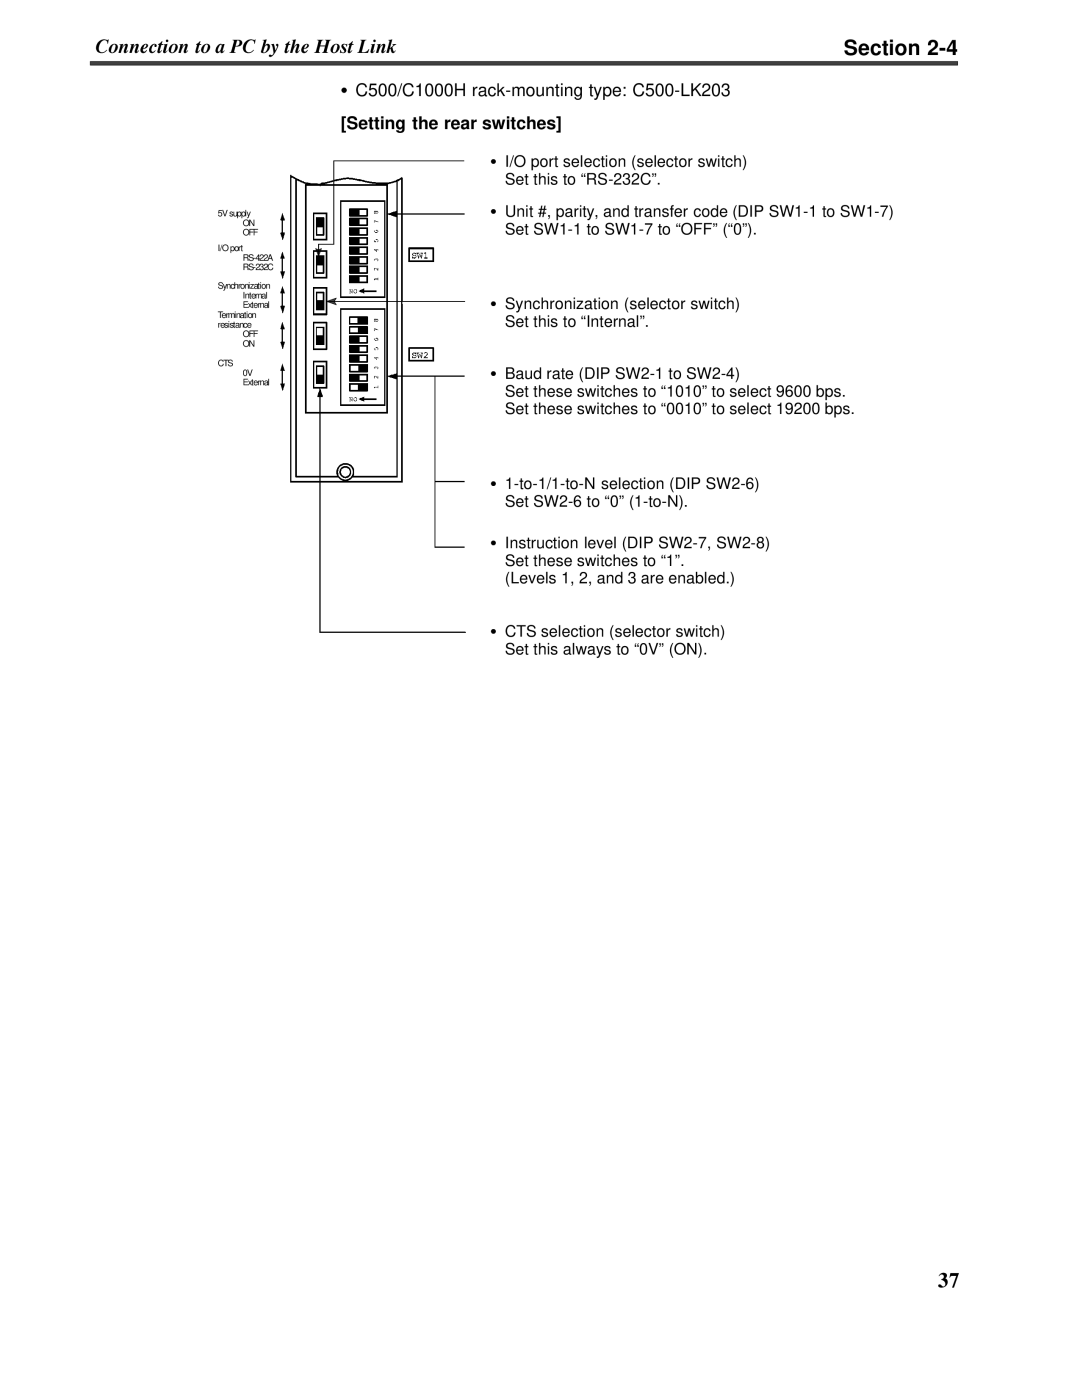 Omron V022-E3-1 operation manual Section, C500/C1000H rack-mountingtype: C500-LK203, Setting the rear switches 